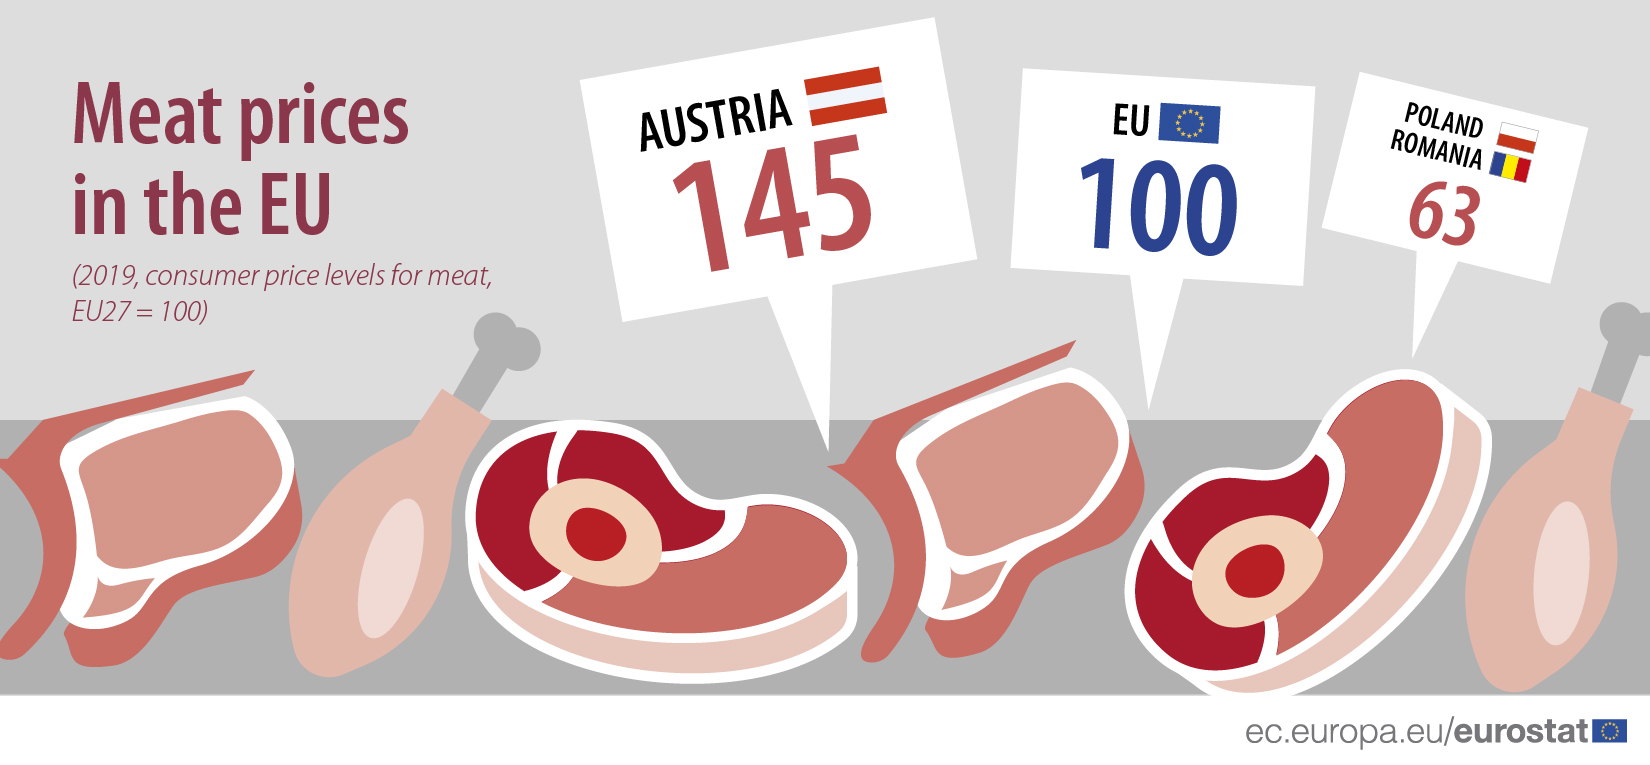 Meat prices in the EU in 2019